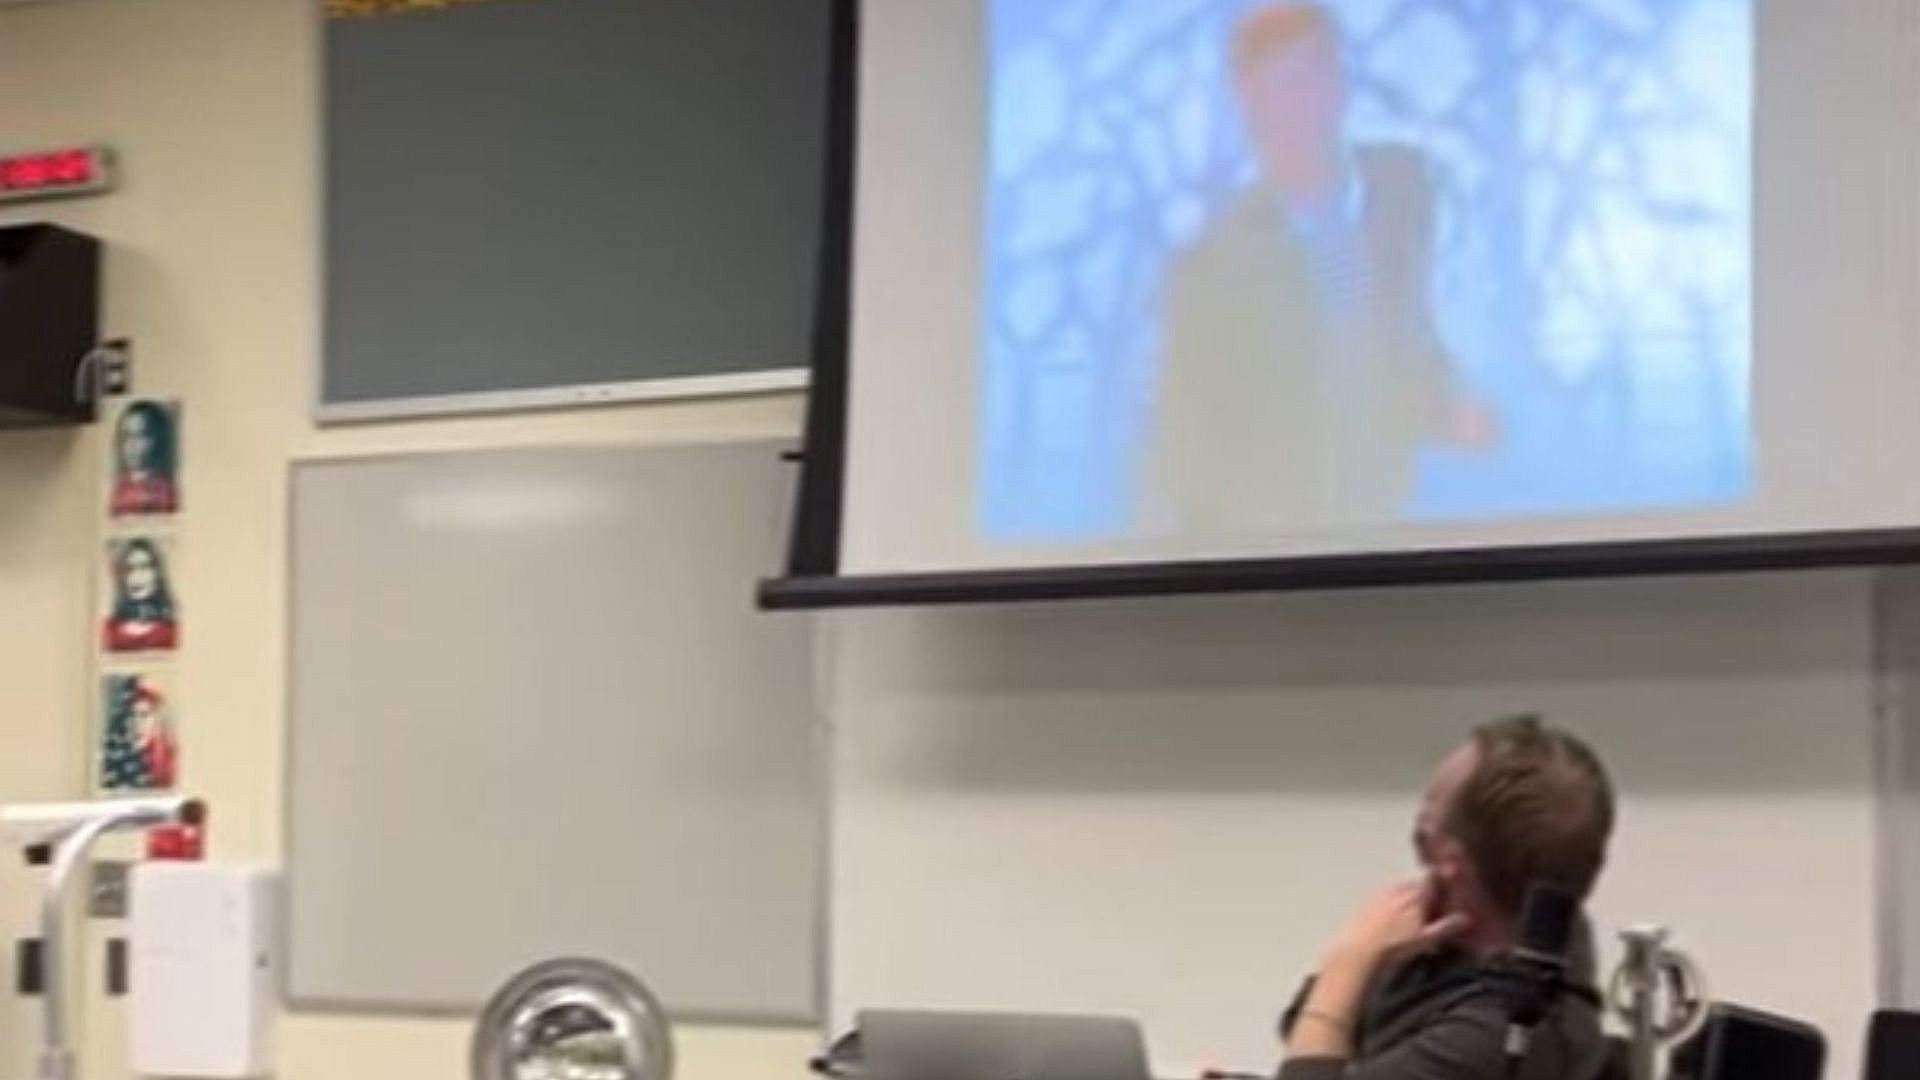 Illinois kid Rick Rolled high school to show a flaw in their security